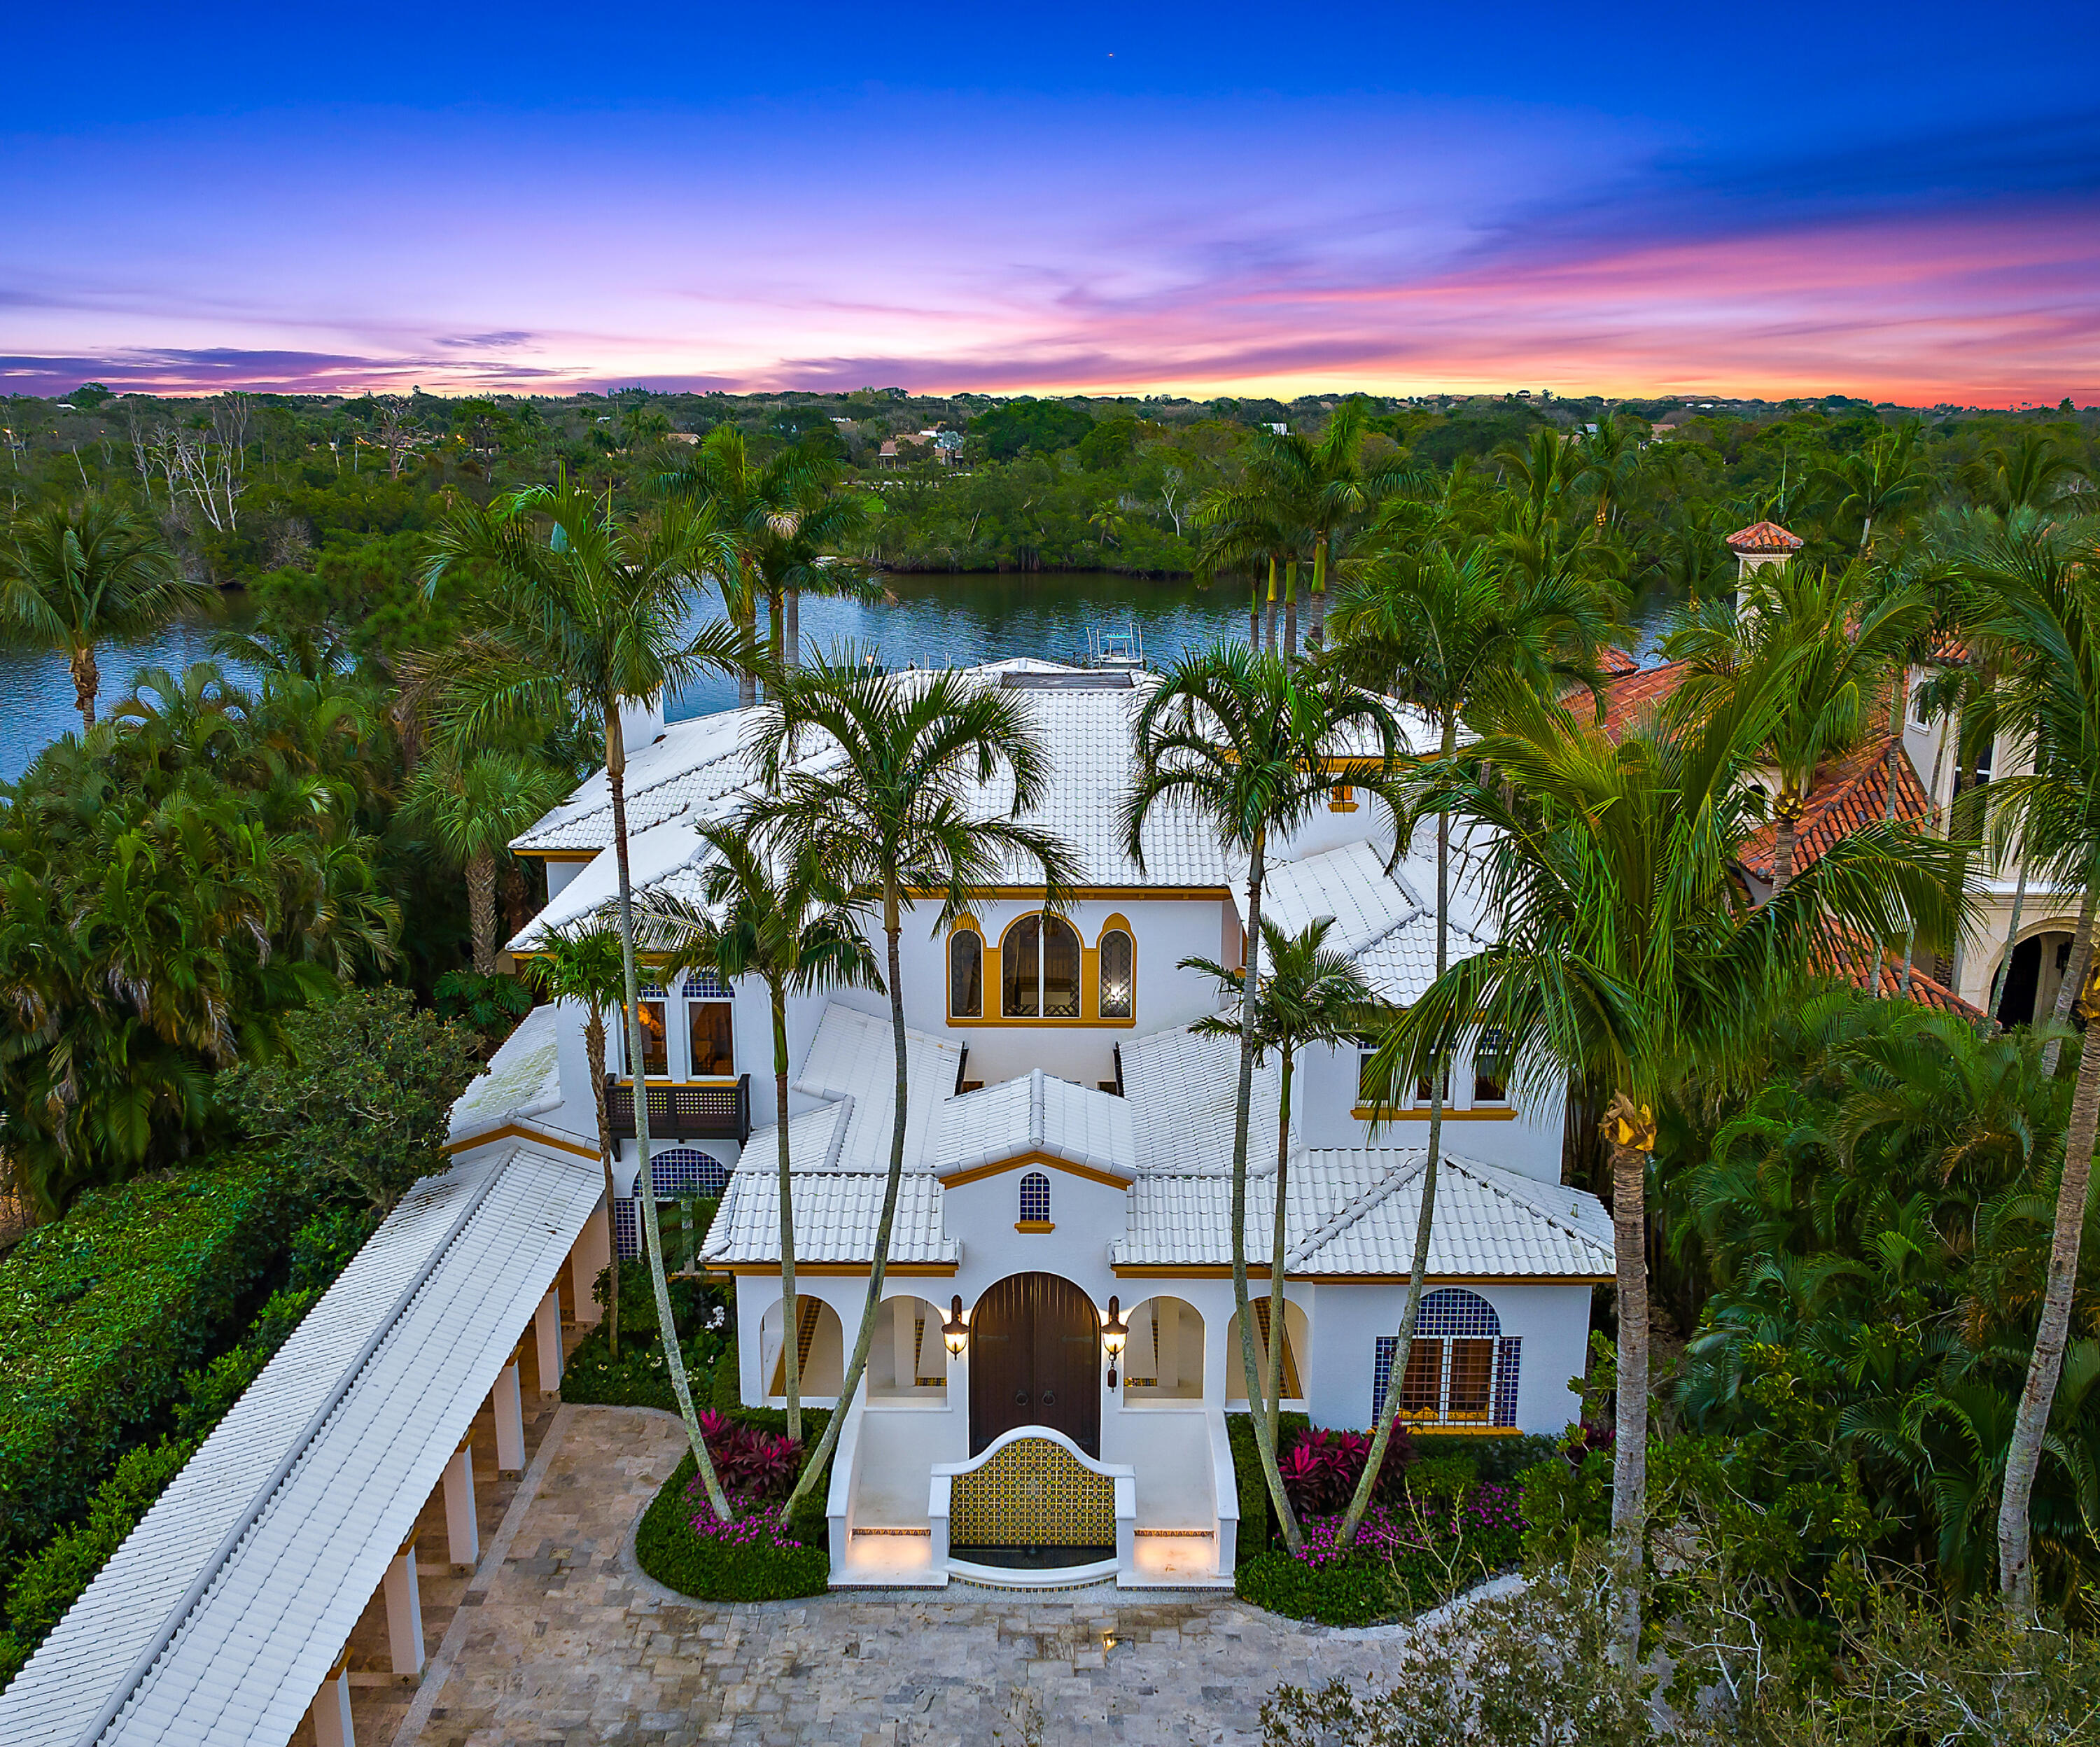 Experience refined living in this extraordinary Intracoastal home, a Moroccan-inspired haven meticulously crafted for luxury. With five bedrooms and eight and a half bathrooms, this 7,175 sq ft (10,803 sq ft total) residence sits on .68 acres. Boasting over 90 feet of direct waterfront, a 120-foot dock, deep water access, and proximity to Palm Beach & Jupiter inlets with no fixed bridges, it's a boater's dream. Overlooking 24 acres of nature preserve, the home was remodeled in 2018, featuring a new in-law suite, pool cabana, covered porch, balcony, office, two boat lifts, whole-home generator, new pool heater, and top-of-the-line appliances.